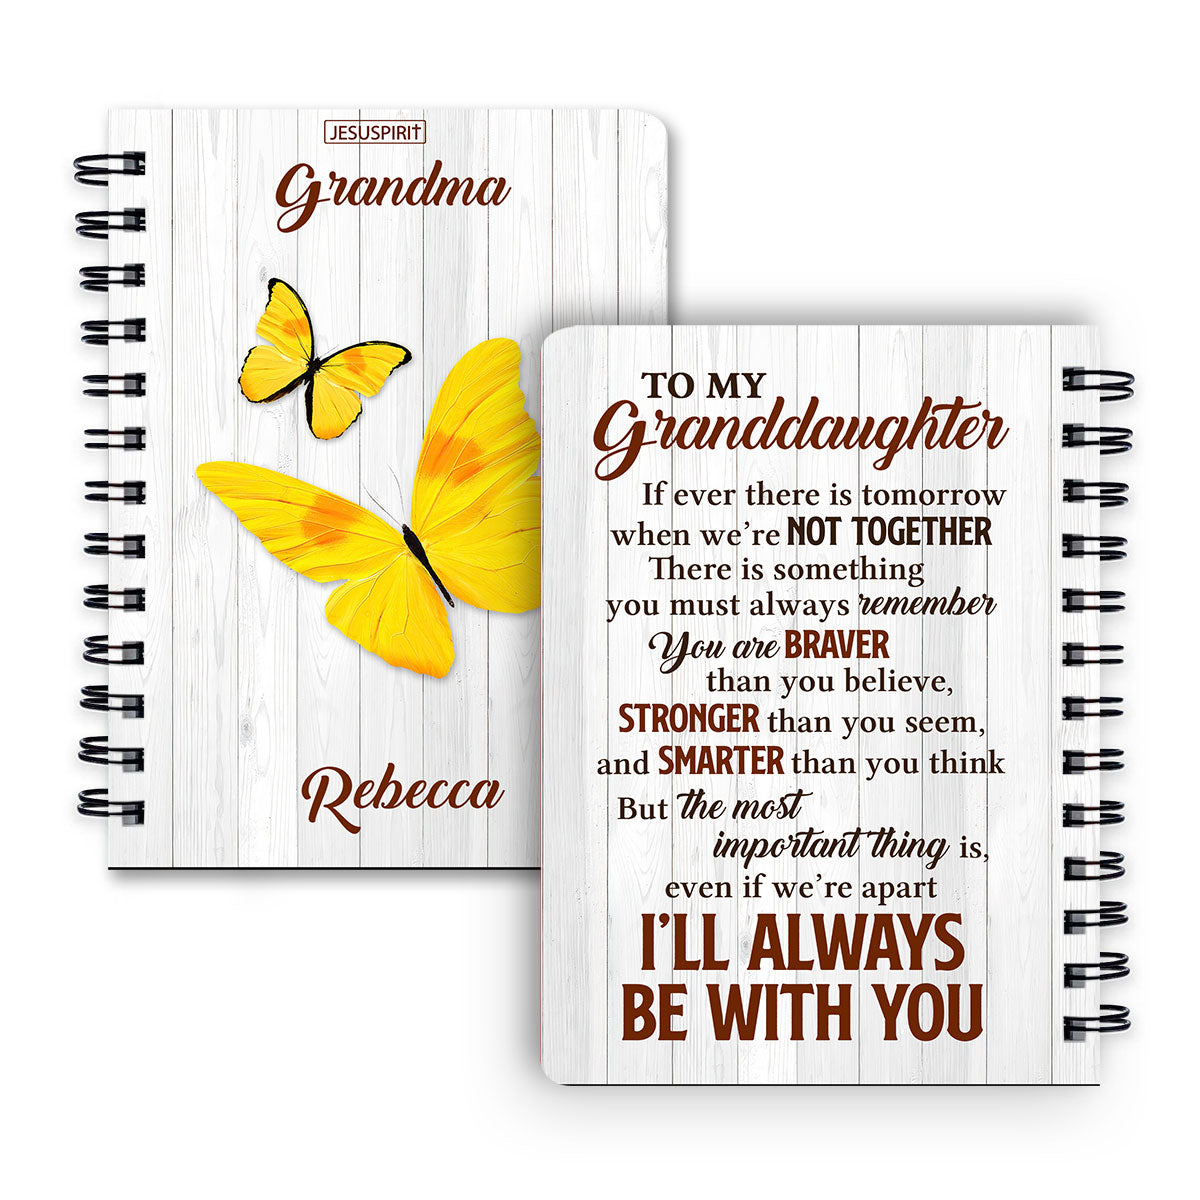 Special Personalized Spiral Journal For Grandchildren - I‘ll Always Be With You NUA220